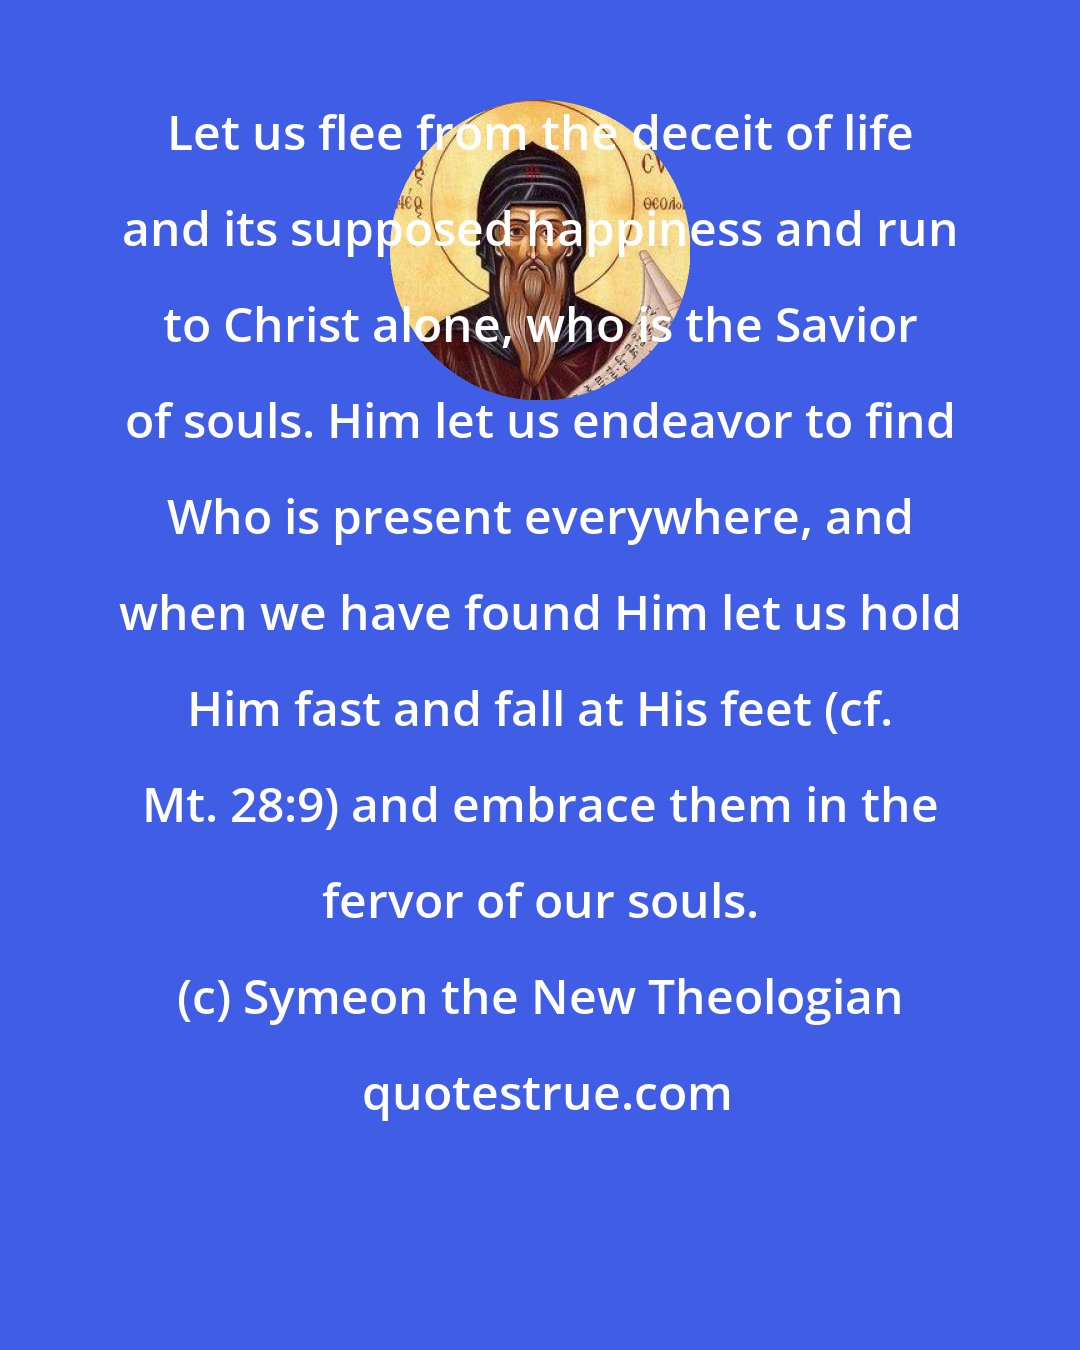 Symeon the New Theologian: Let us flee from the deceit of life and its supposed happiness and run to Christ alone, who is the Savior of souls. Him let us endeavor to find Who is present everywhere, and when we have found Him let us hold Him fast and fall at His feet (cf. Mt. 28:9) and embrace them in the fervor of our souls.